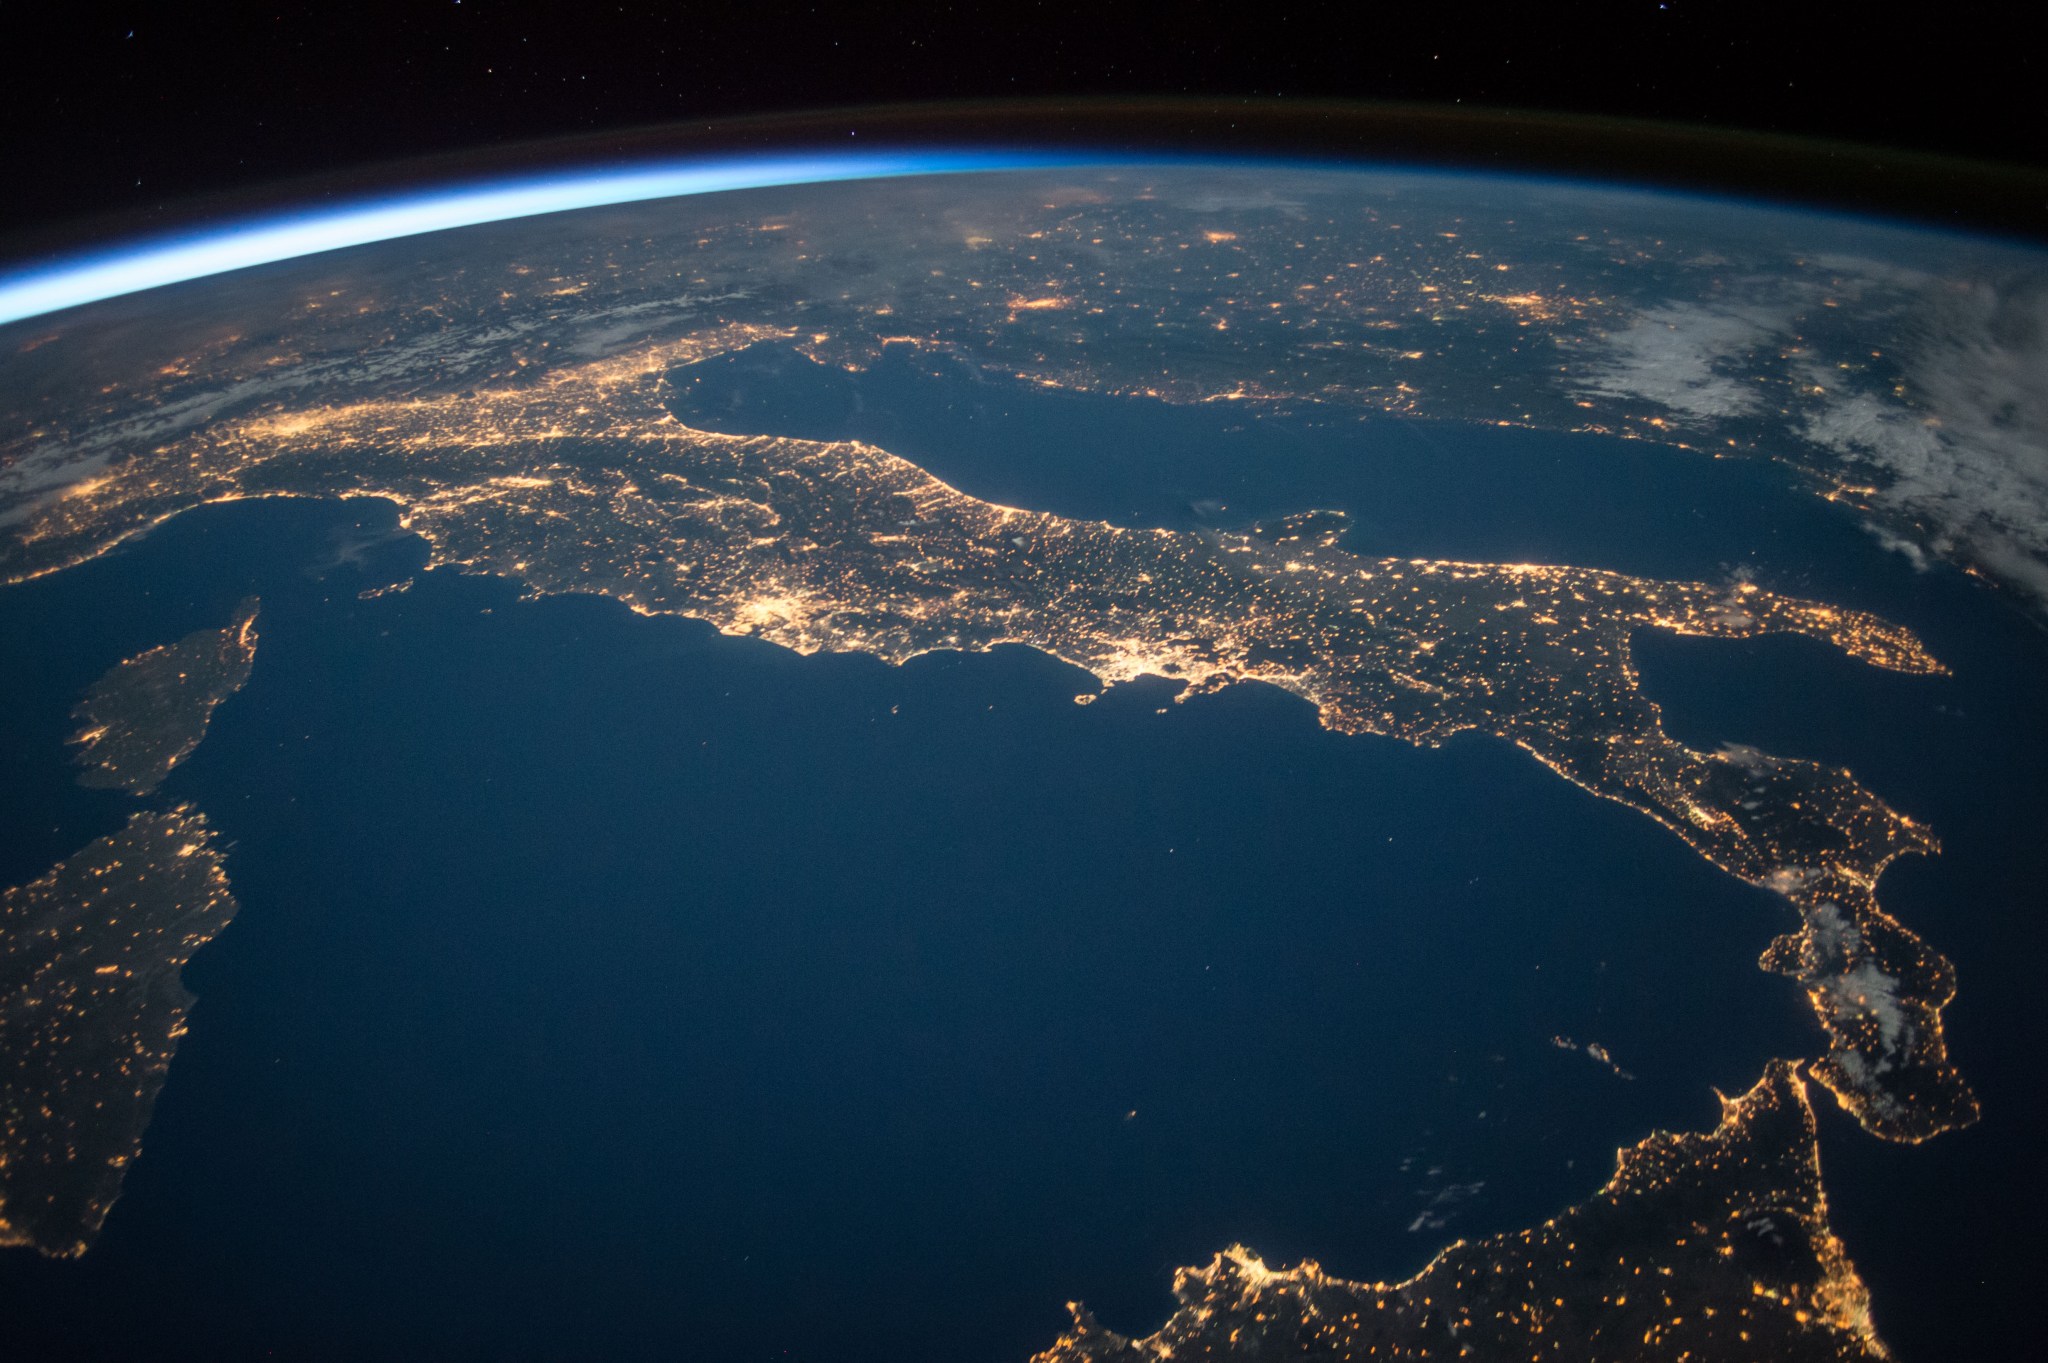 The familiar u0022bootu0022 shape of the country of Italy stands out in this nighttime image with sparkling city lights reaching from Sicily off the u0022toeu0022 of the boot, to the approaches to the Alps on the north end of the country.